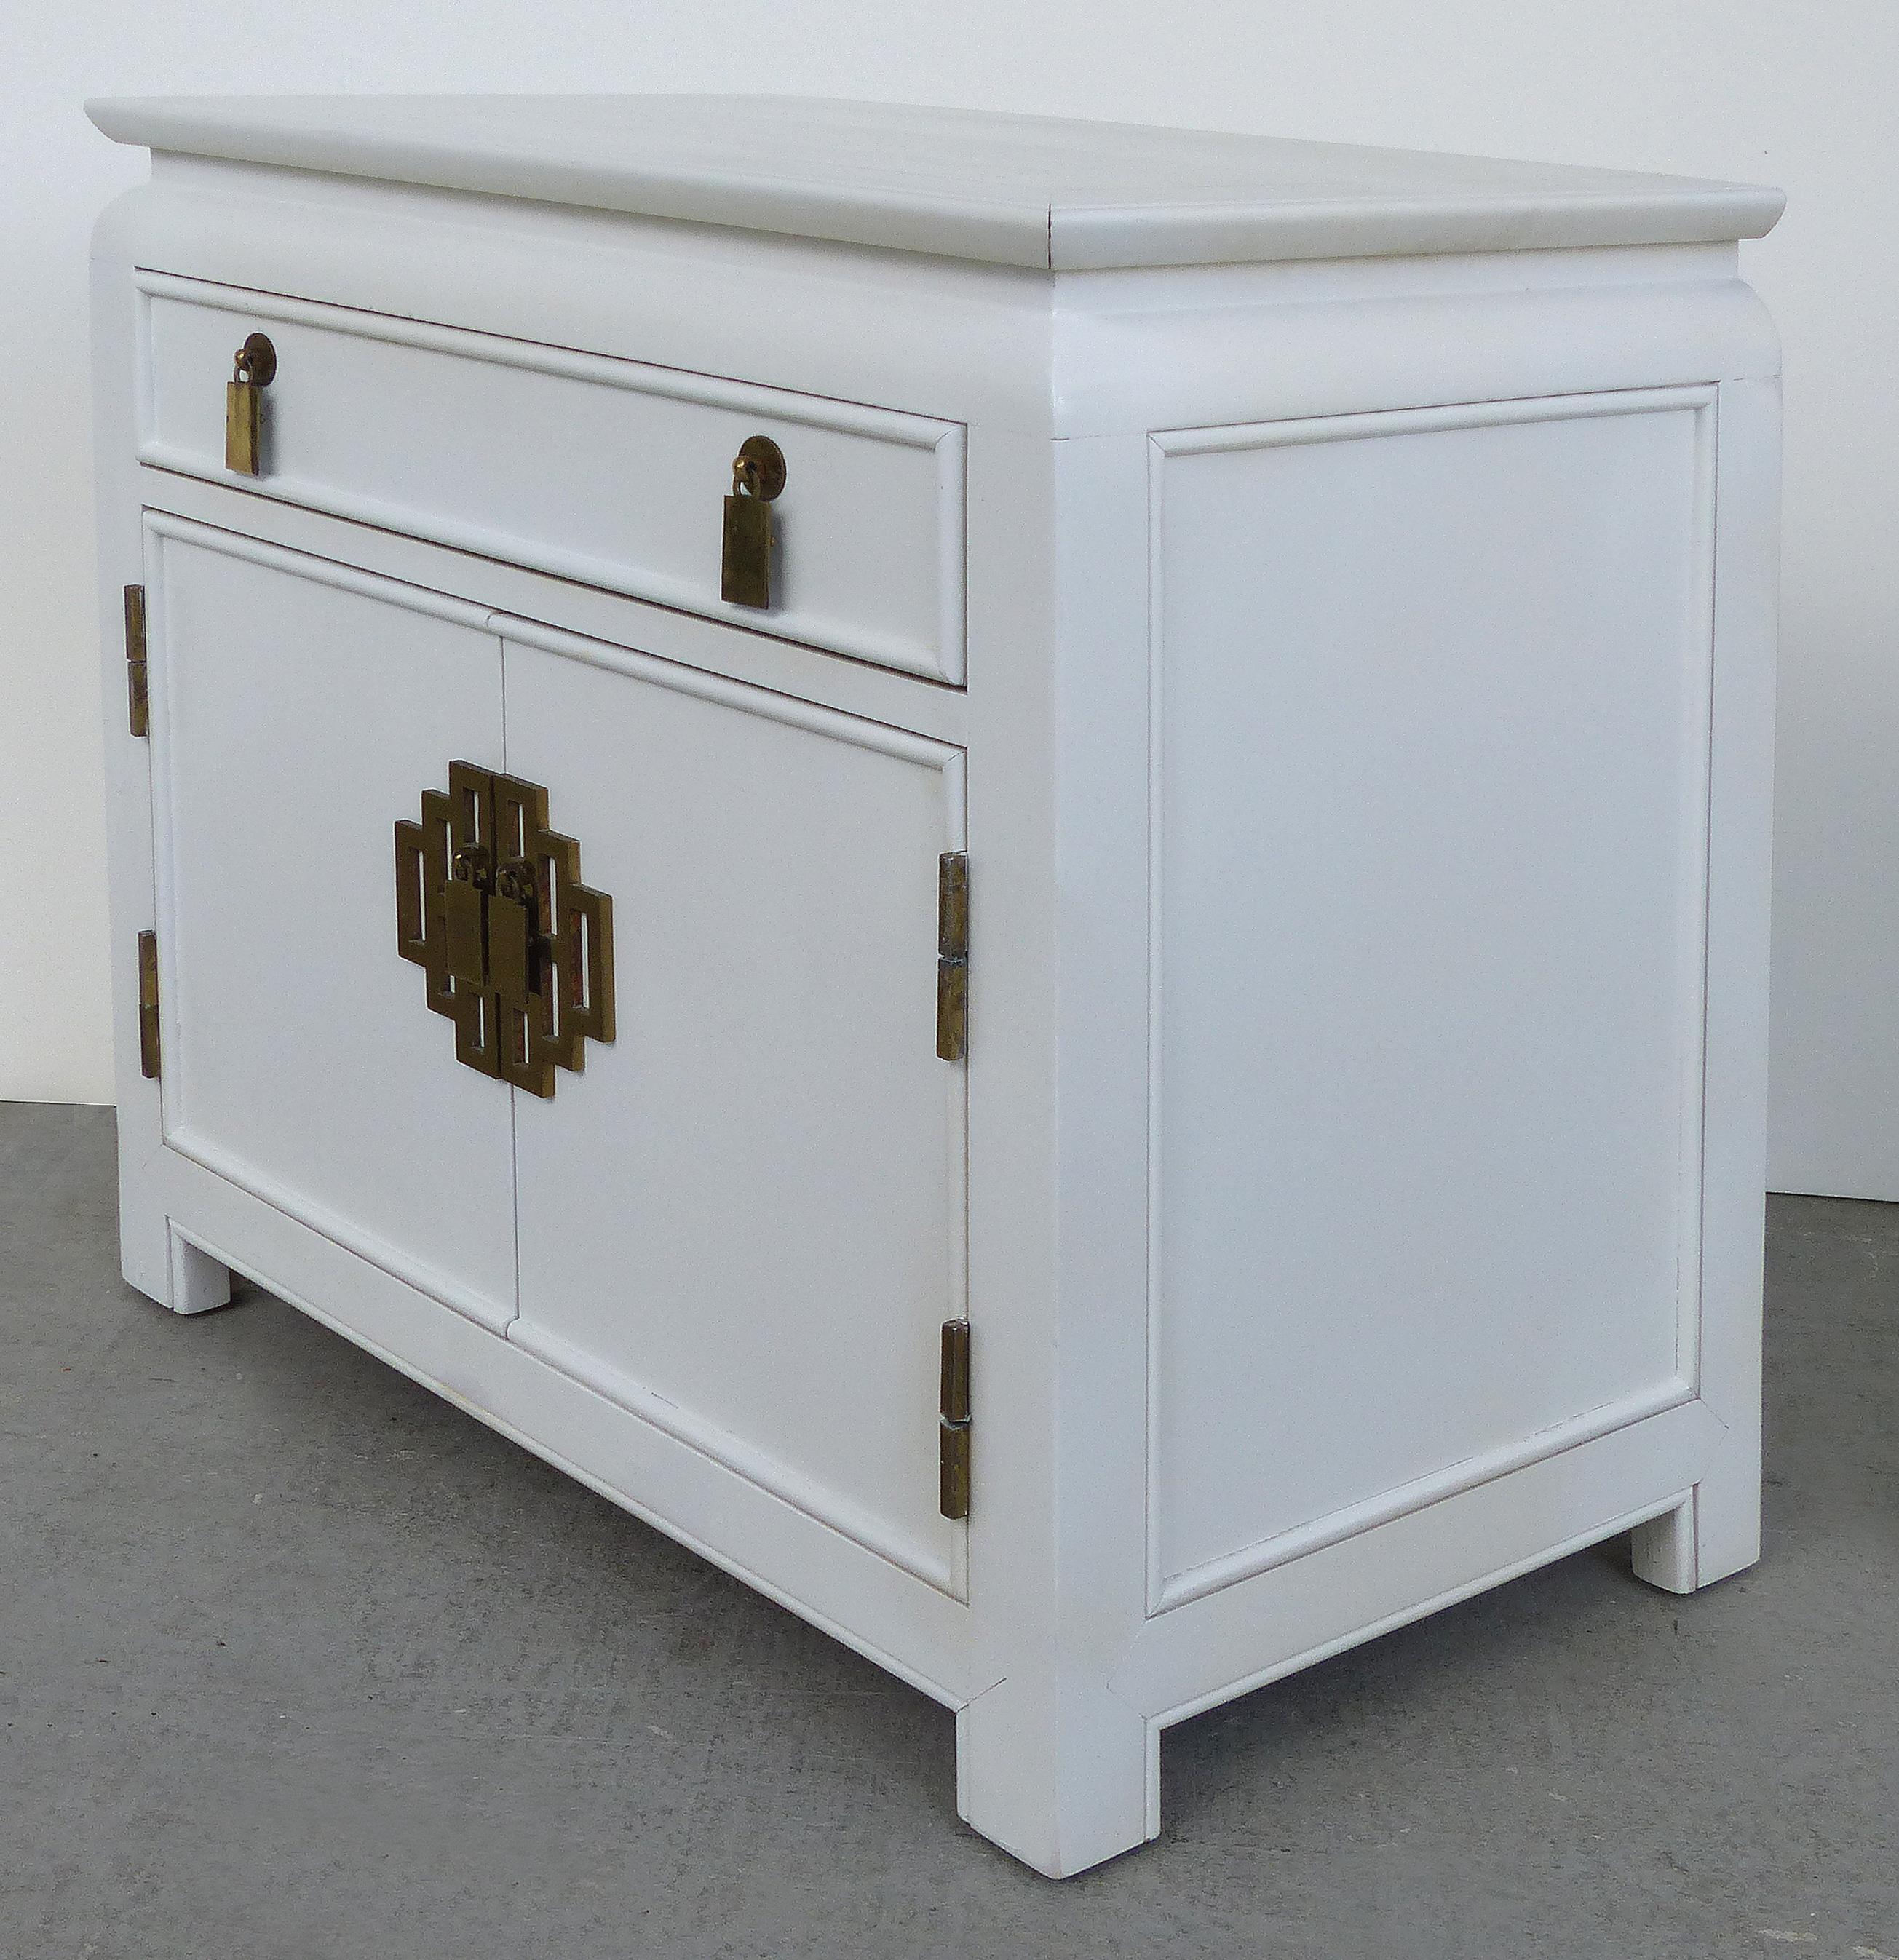 Offered for sale is a pair of midcentury Asian modern nightstands manufactured by the Century Furniture Company. These nightstands have a slender drawer above two doors that open to reveal storage space. They are lacquered in white and have